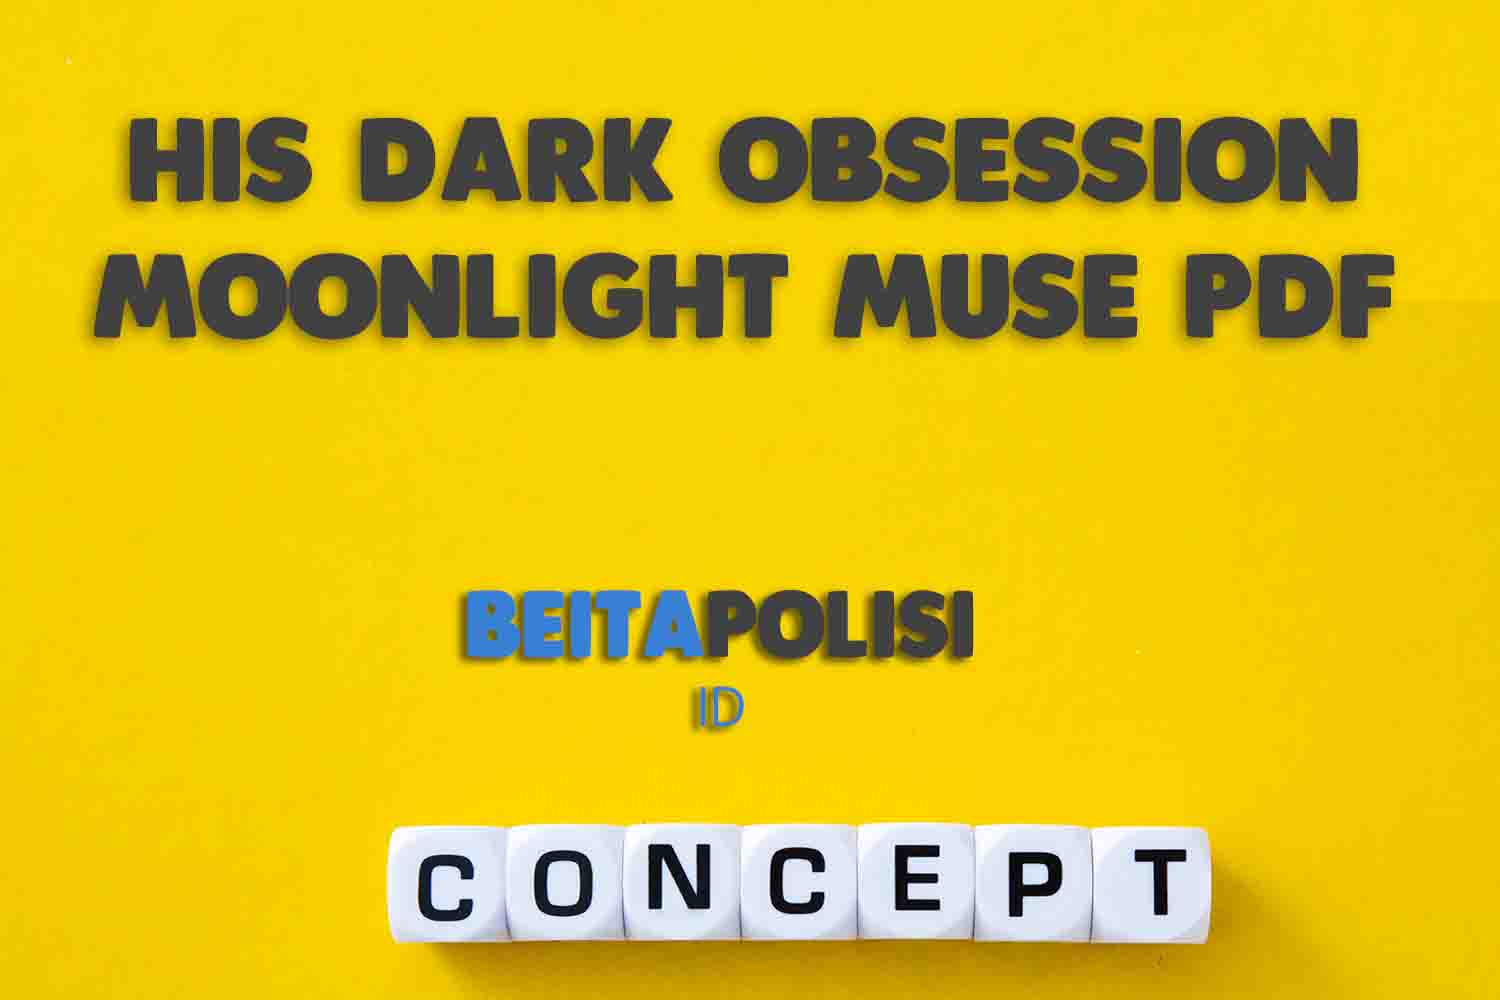 His Dark Obsession Moonlight Muse Pdf Novel Book A Profound Review And Reading Guide